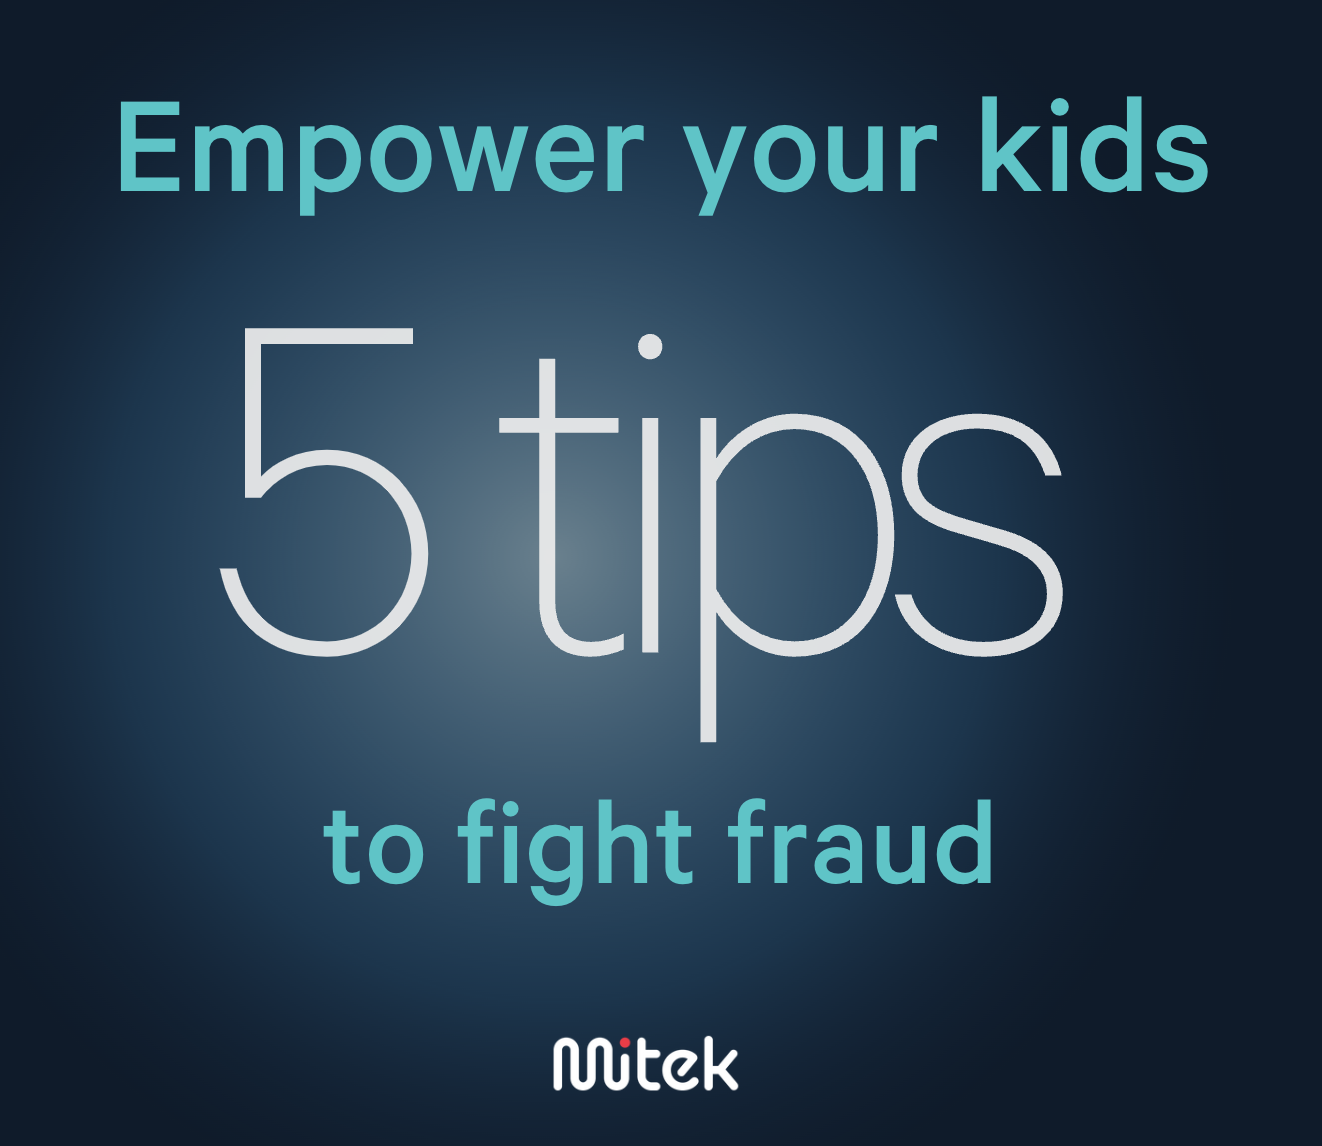 5 Tips to empower your kids to fight fraud